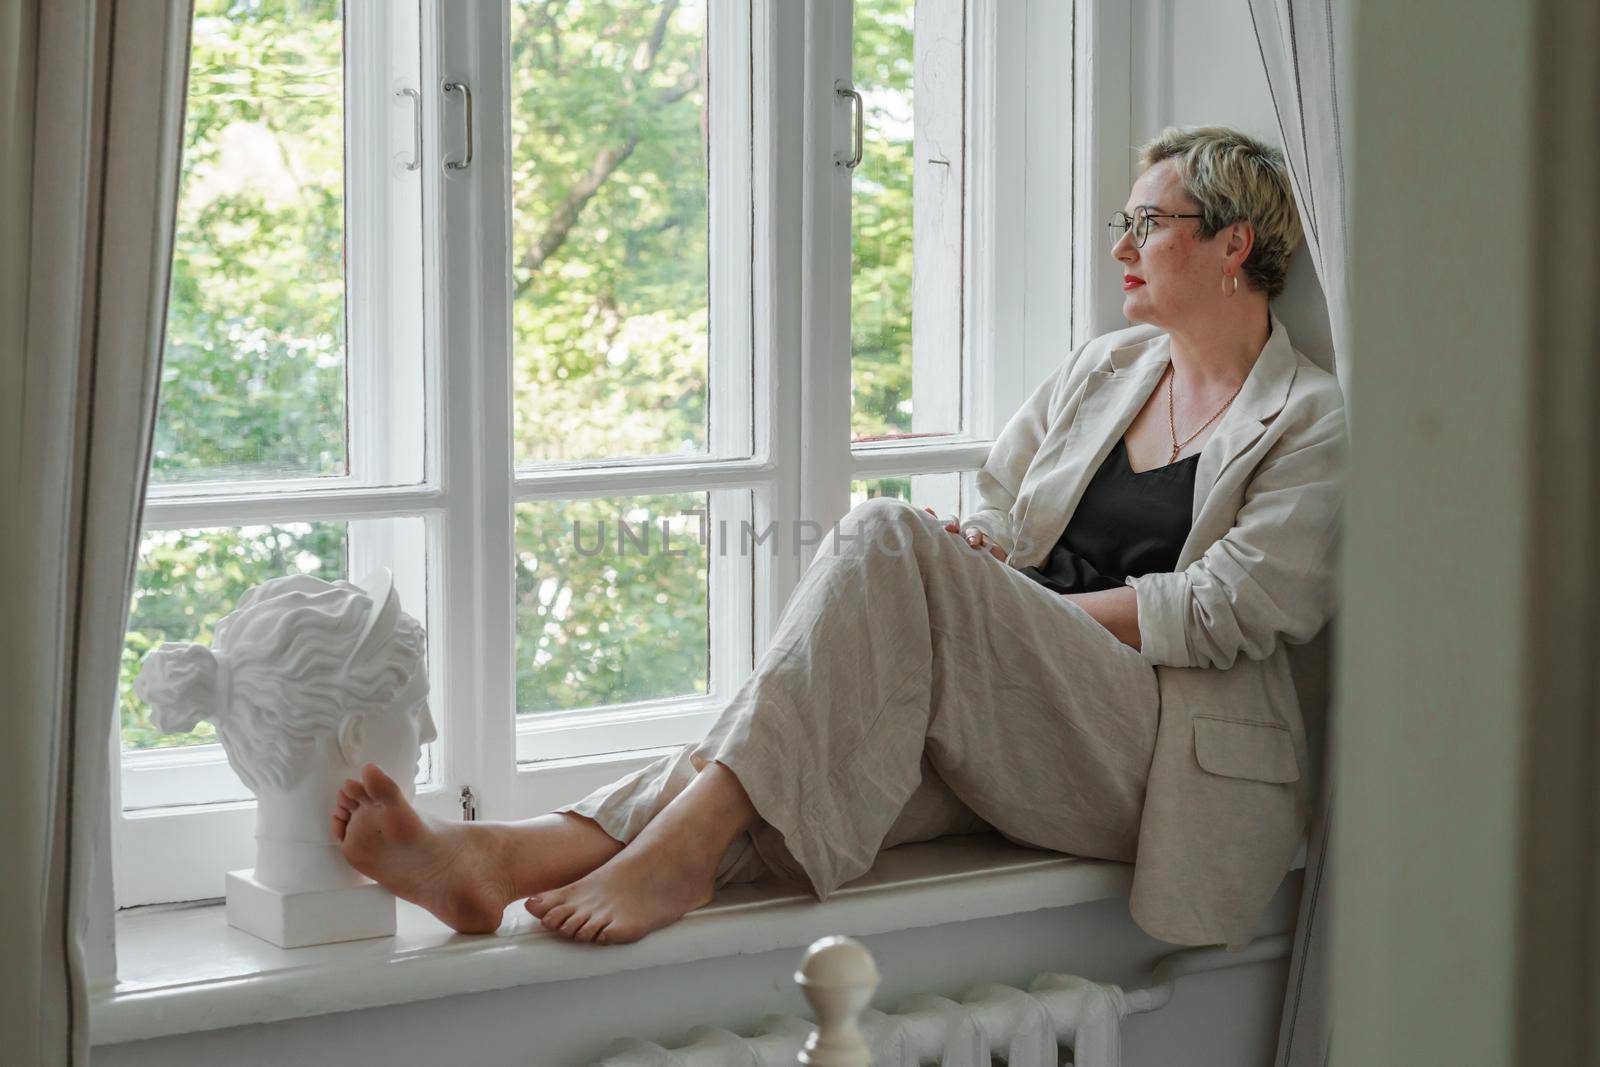 A middle-aged woman in a beige suit and black tank top sits mysteriously and looks out the window on the windowsill. Green trees outside.